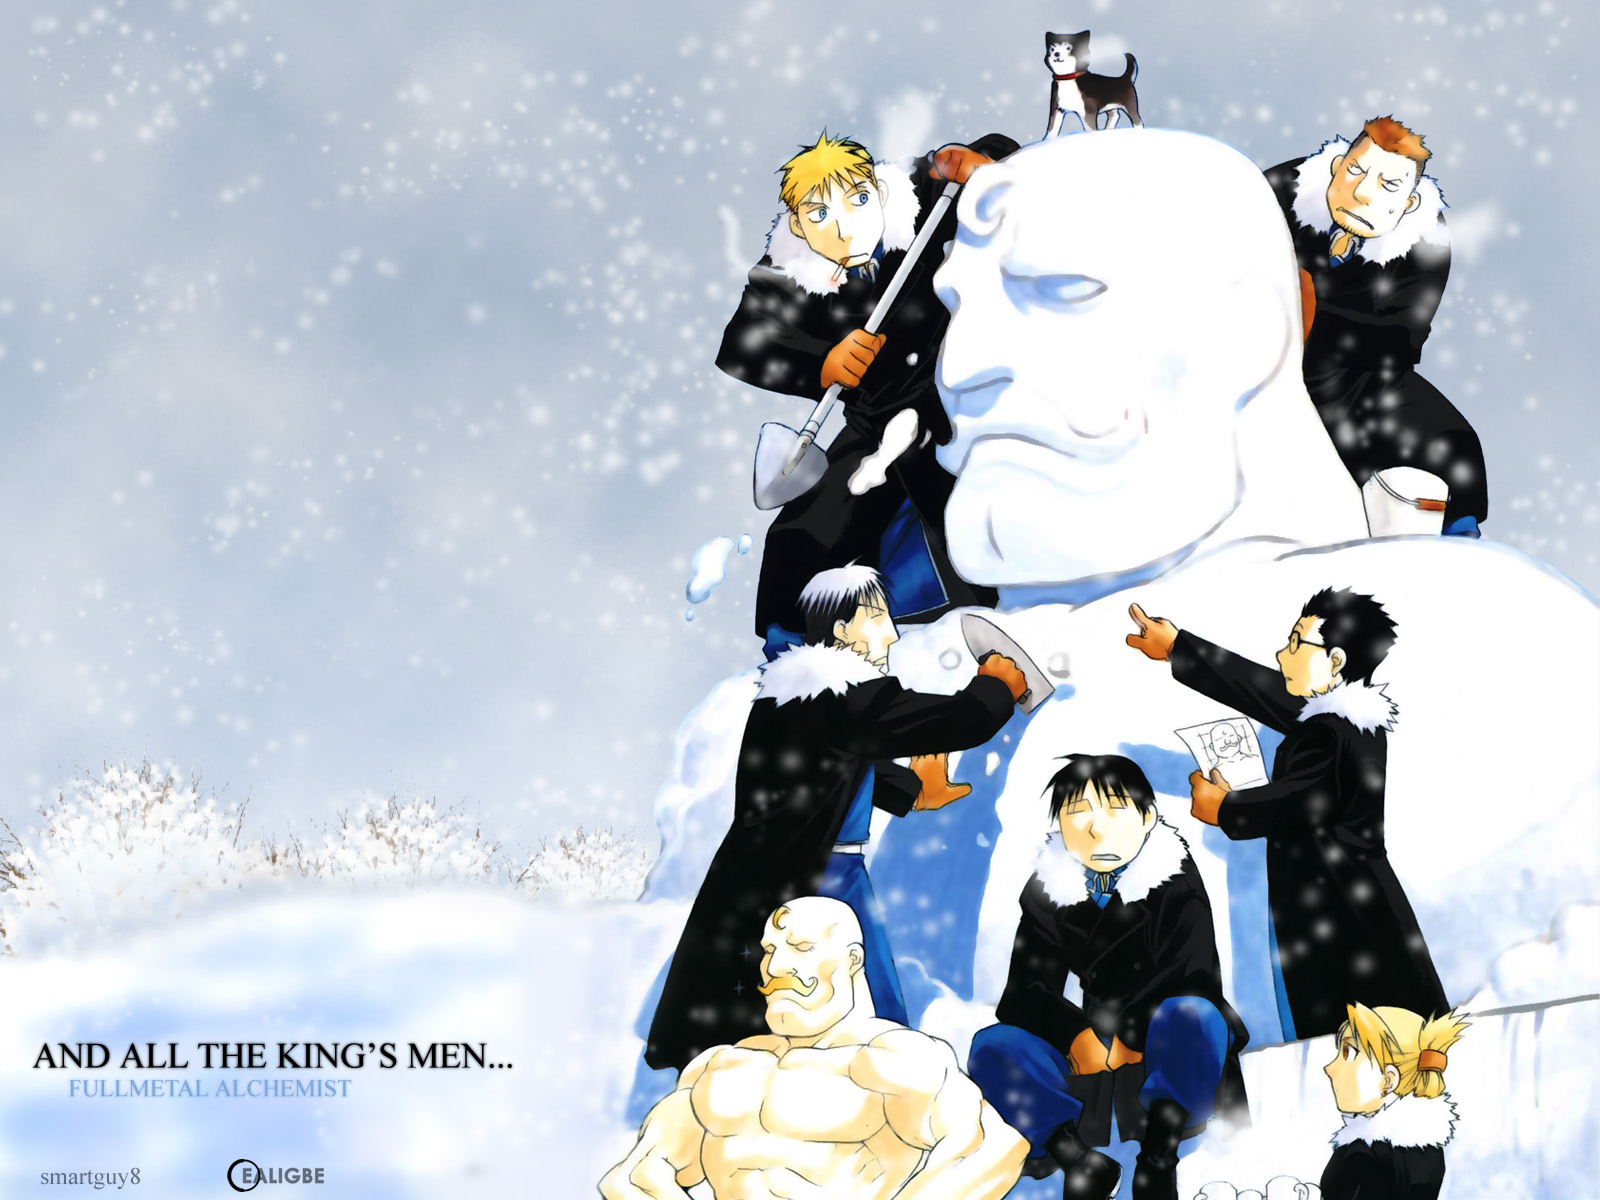 Prominent characters of Fullmetal Alchemist gathered in a snowy landscape with a sculpture and a dog.